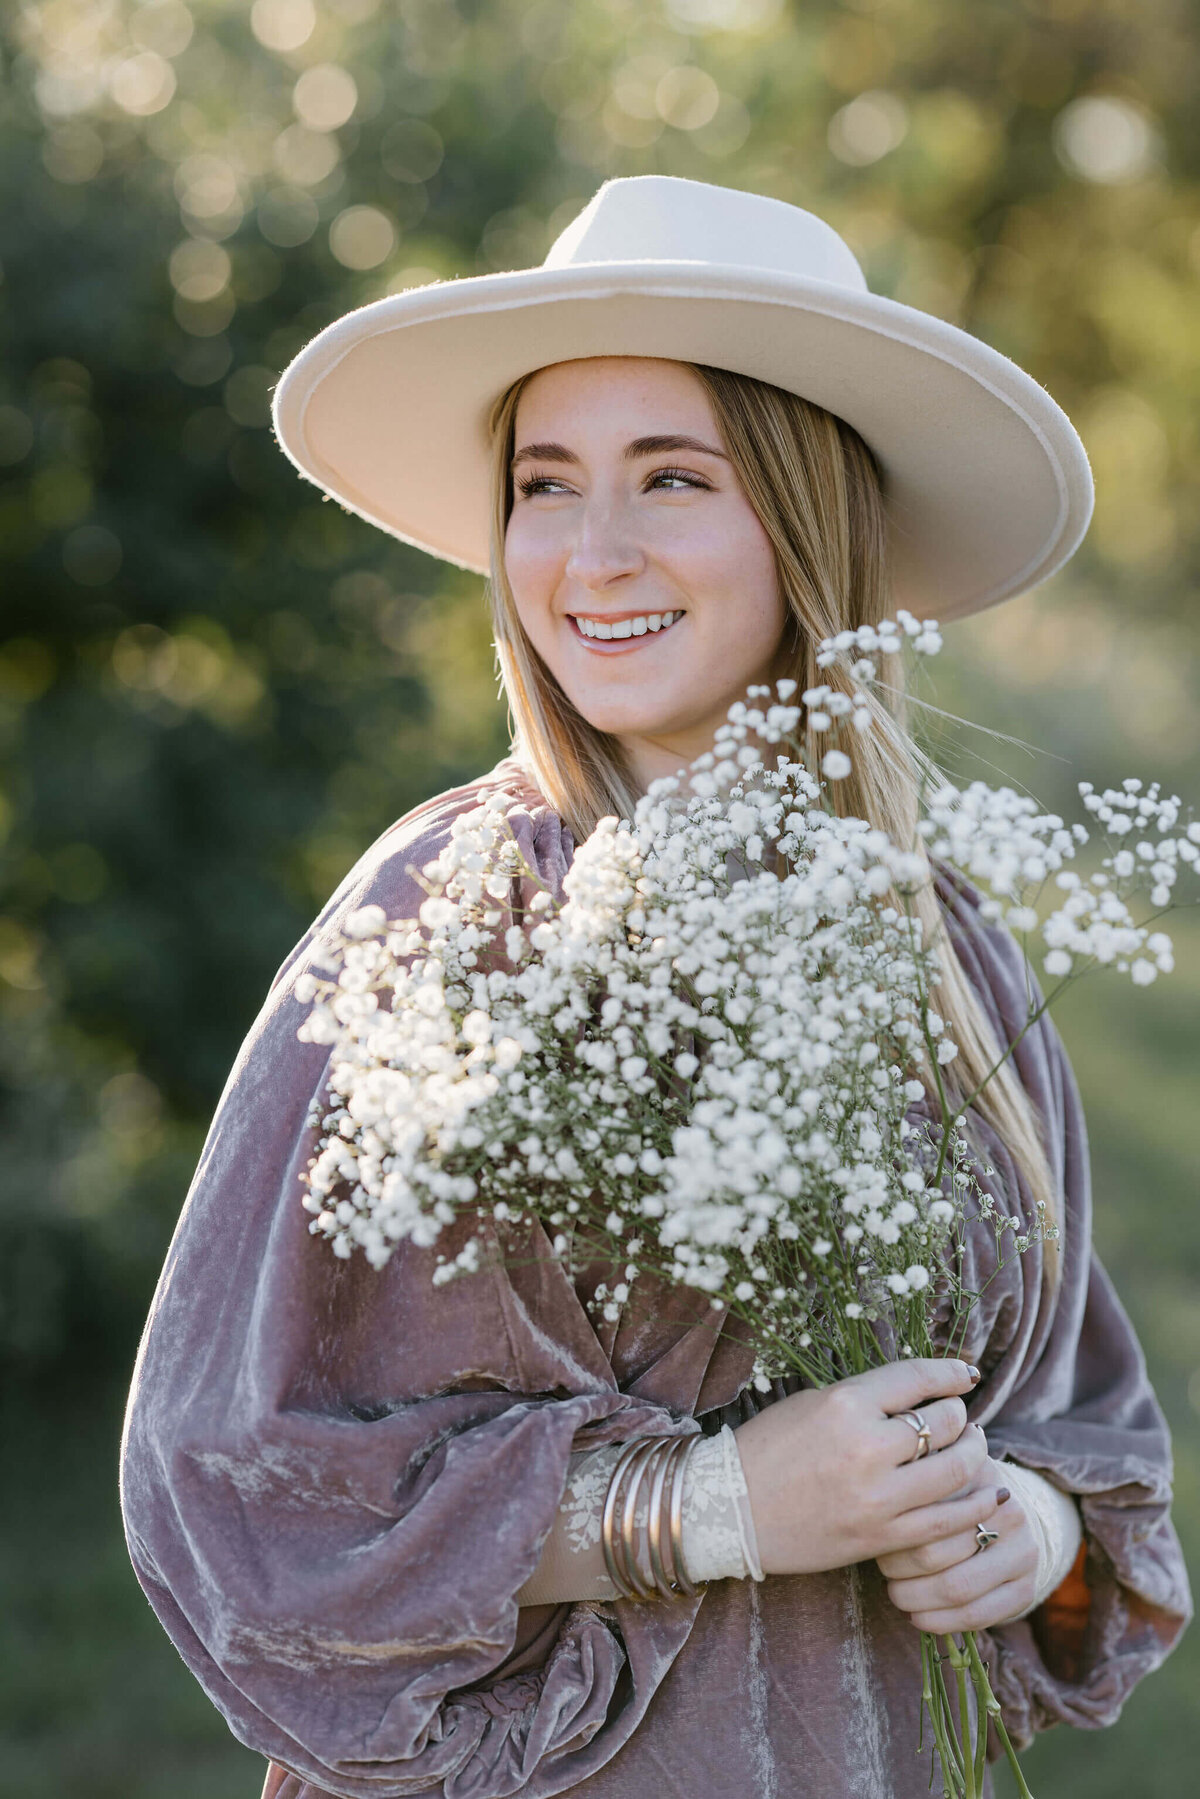 Marshall high school senior girl in pink velvet dress and white hat holding baby's breath flowers and laughing over shoulder